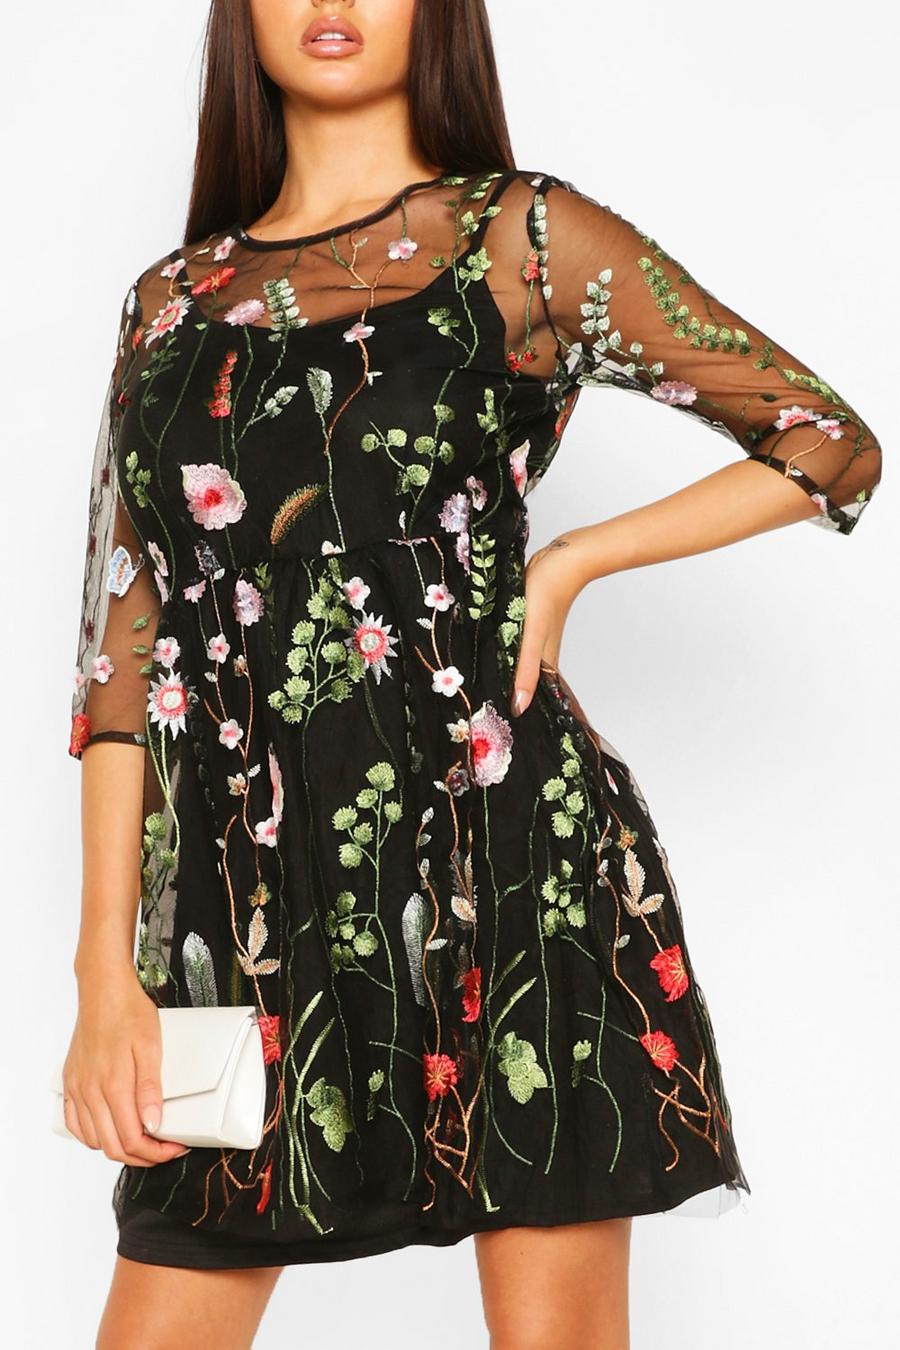 Annihilate Up Outgoing Floral Embroidery Mesh Overlay Dress | boohoo